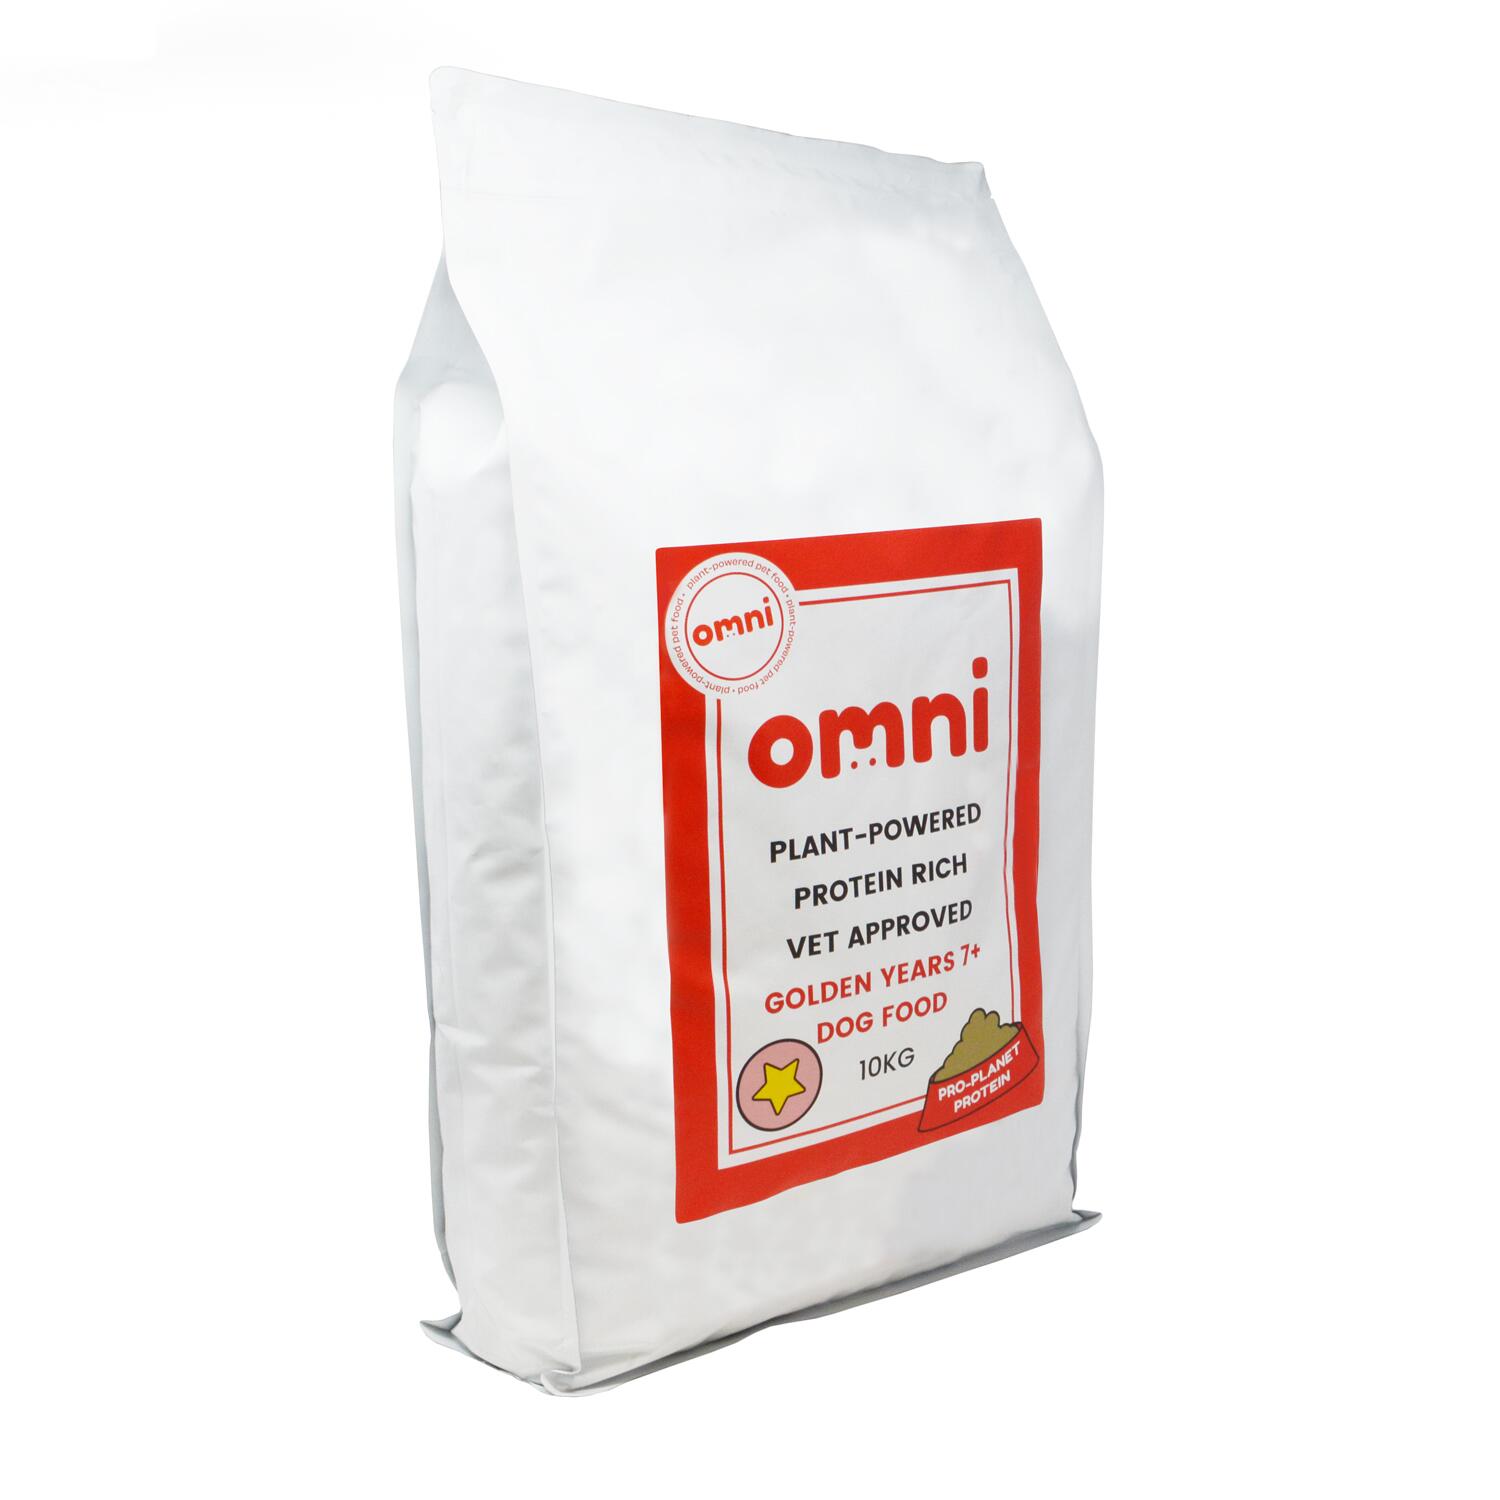 An angled view of a 10kg bag of Omni hypoallergenic complete dog food